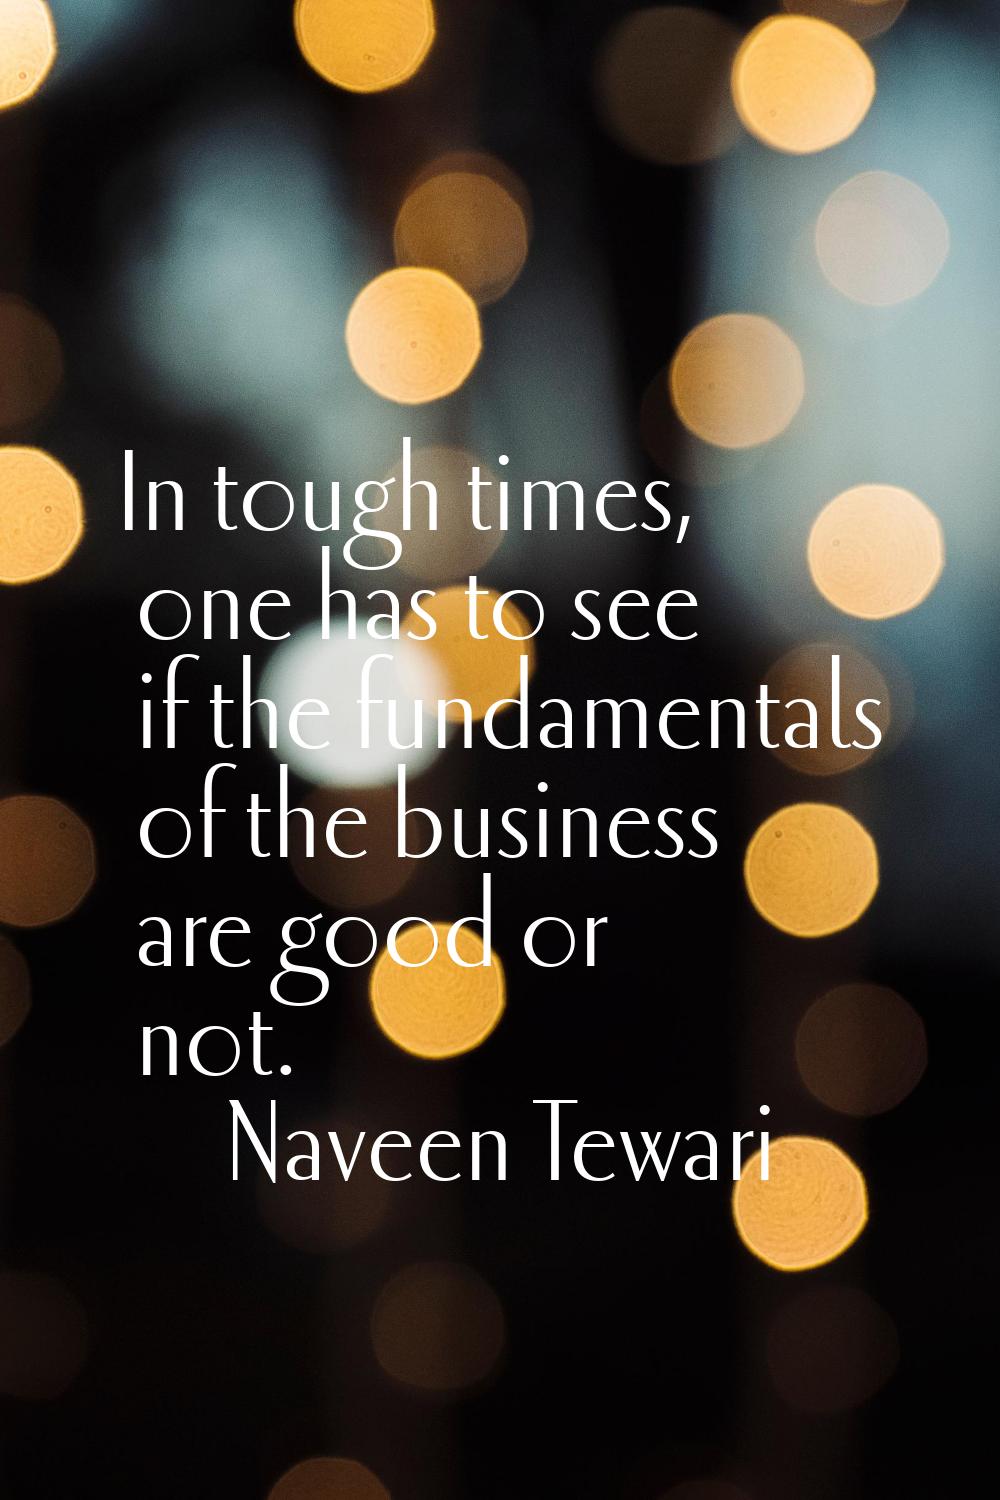 In tough times, one has to see if the fundamentals of the business are good or not.